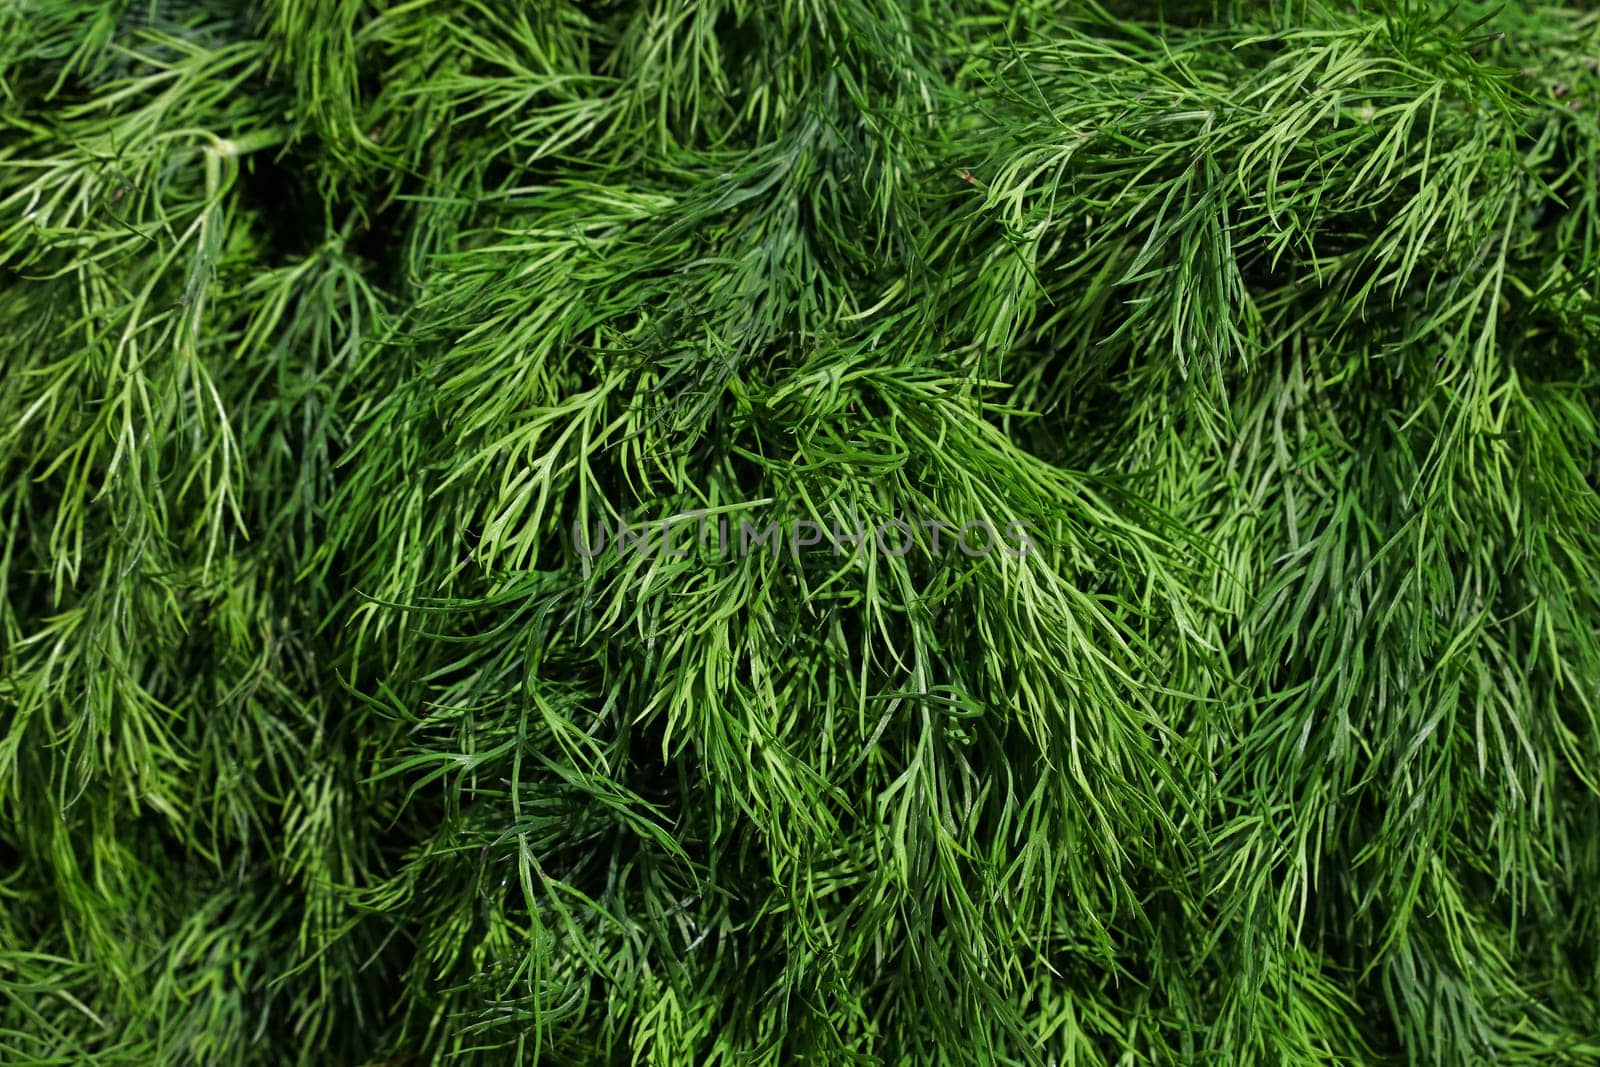 Heap of fresh green dill bunches on farmers market display, close up, high angle view